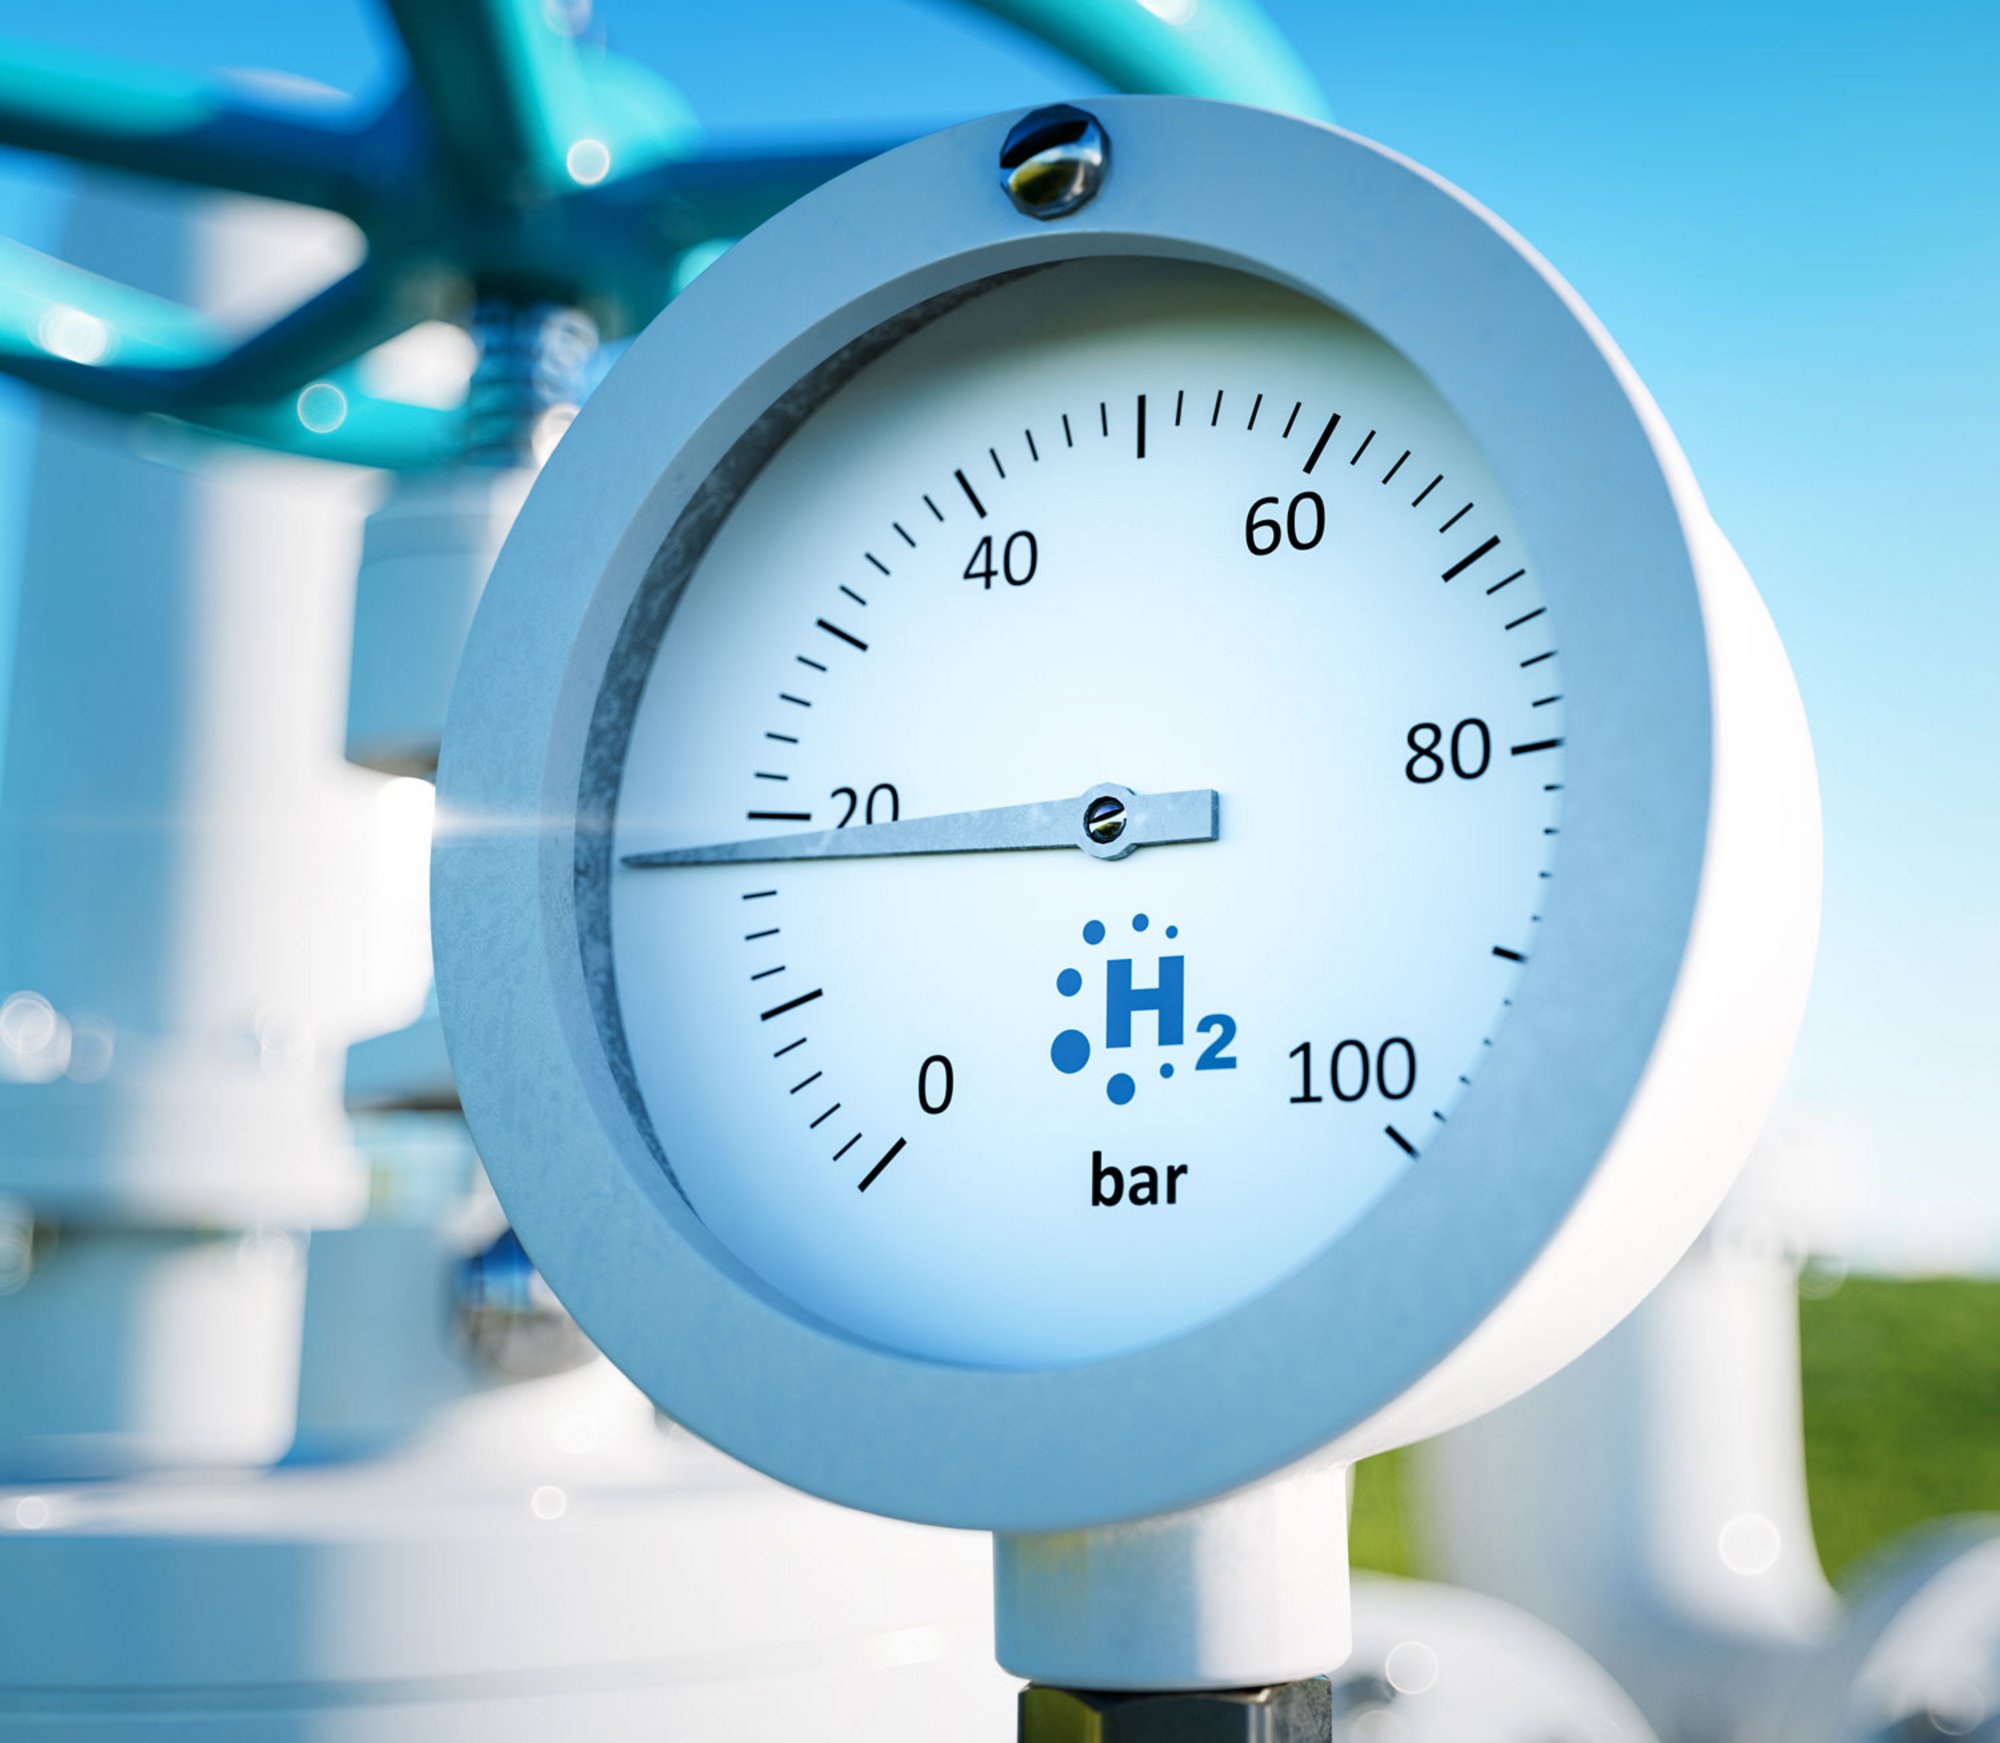 Close up of a manometer with a hydrogen pipe in the background. 3d rendering.